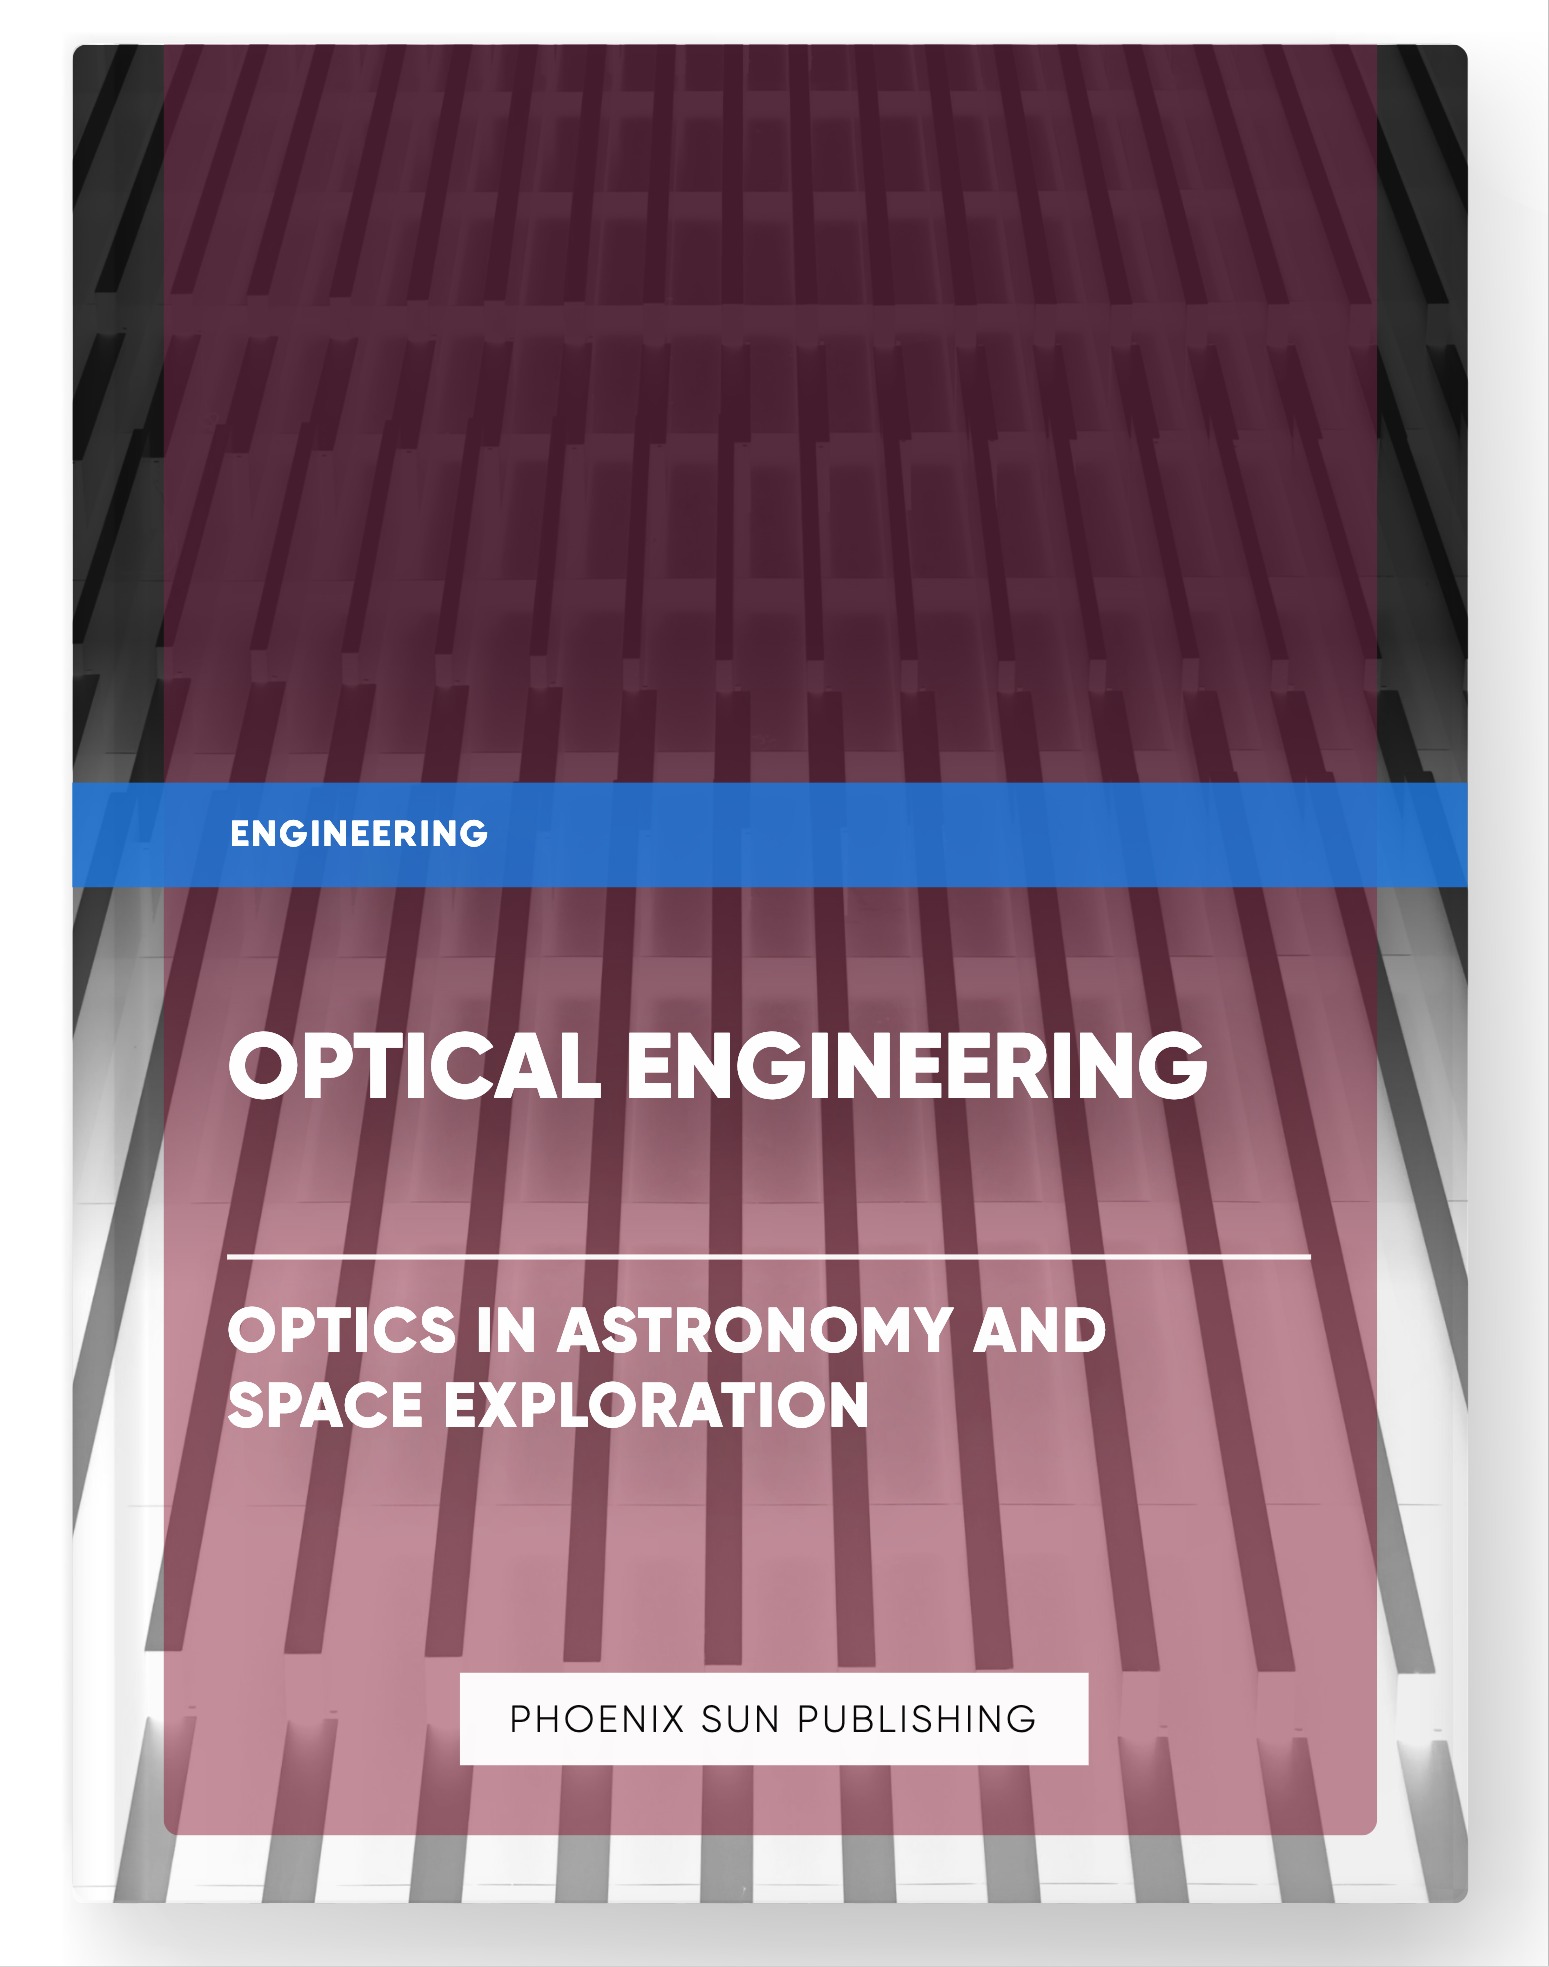 Optical Engineering – Optics in Astronomy and Space Exploration